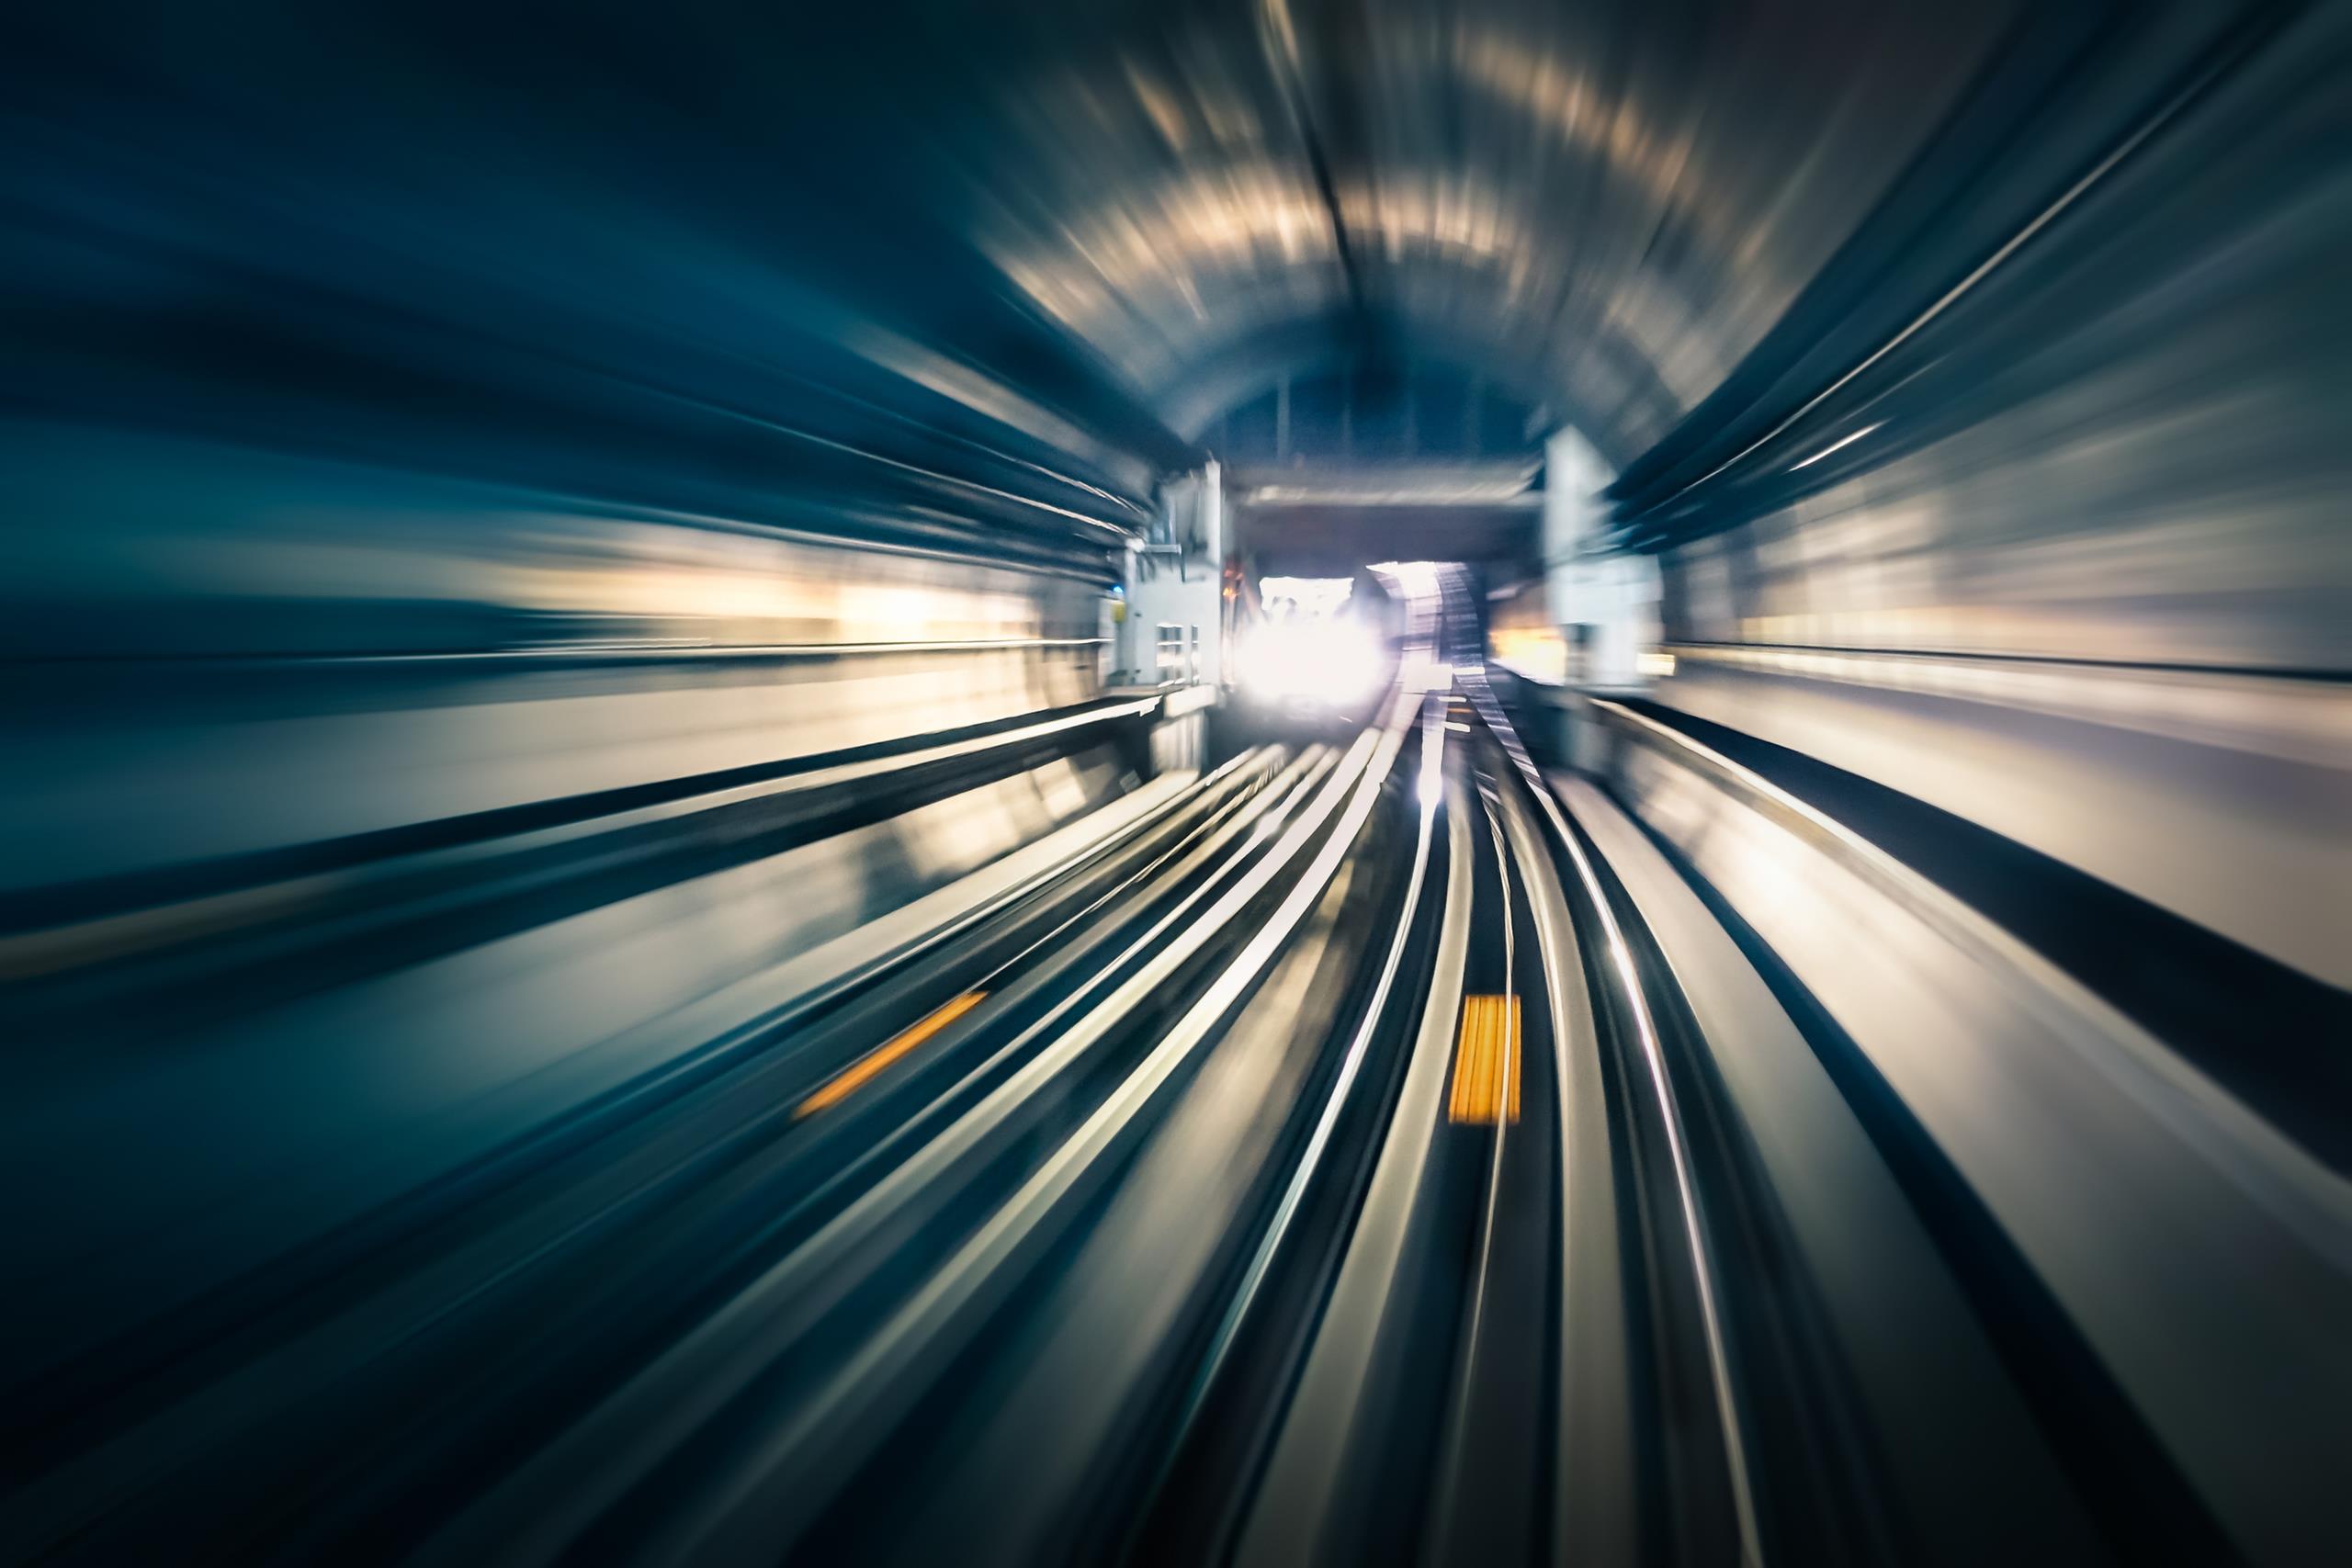 Large infrastructure projects are embracing BIM. Crossrail and London Underground’s Northern Line Extension have both pushed boundaries by doing so. But the scale of HS2 is of a different order.